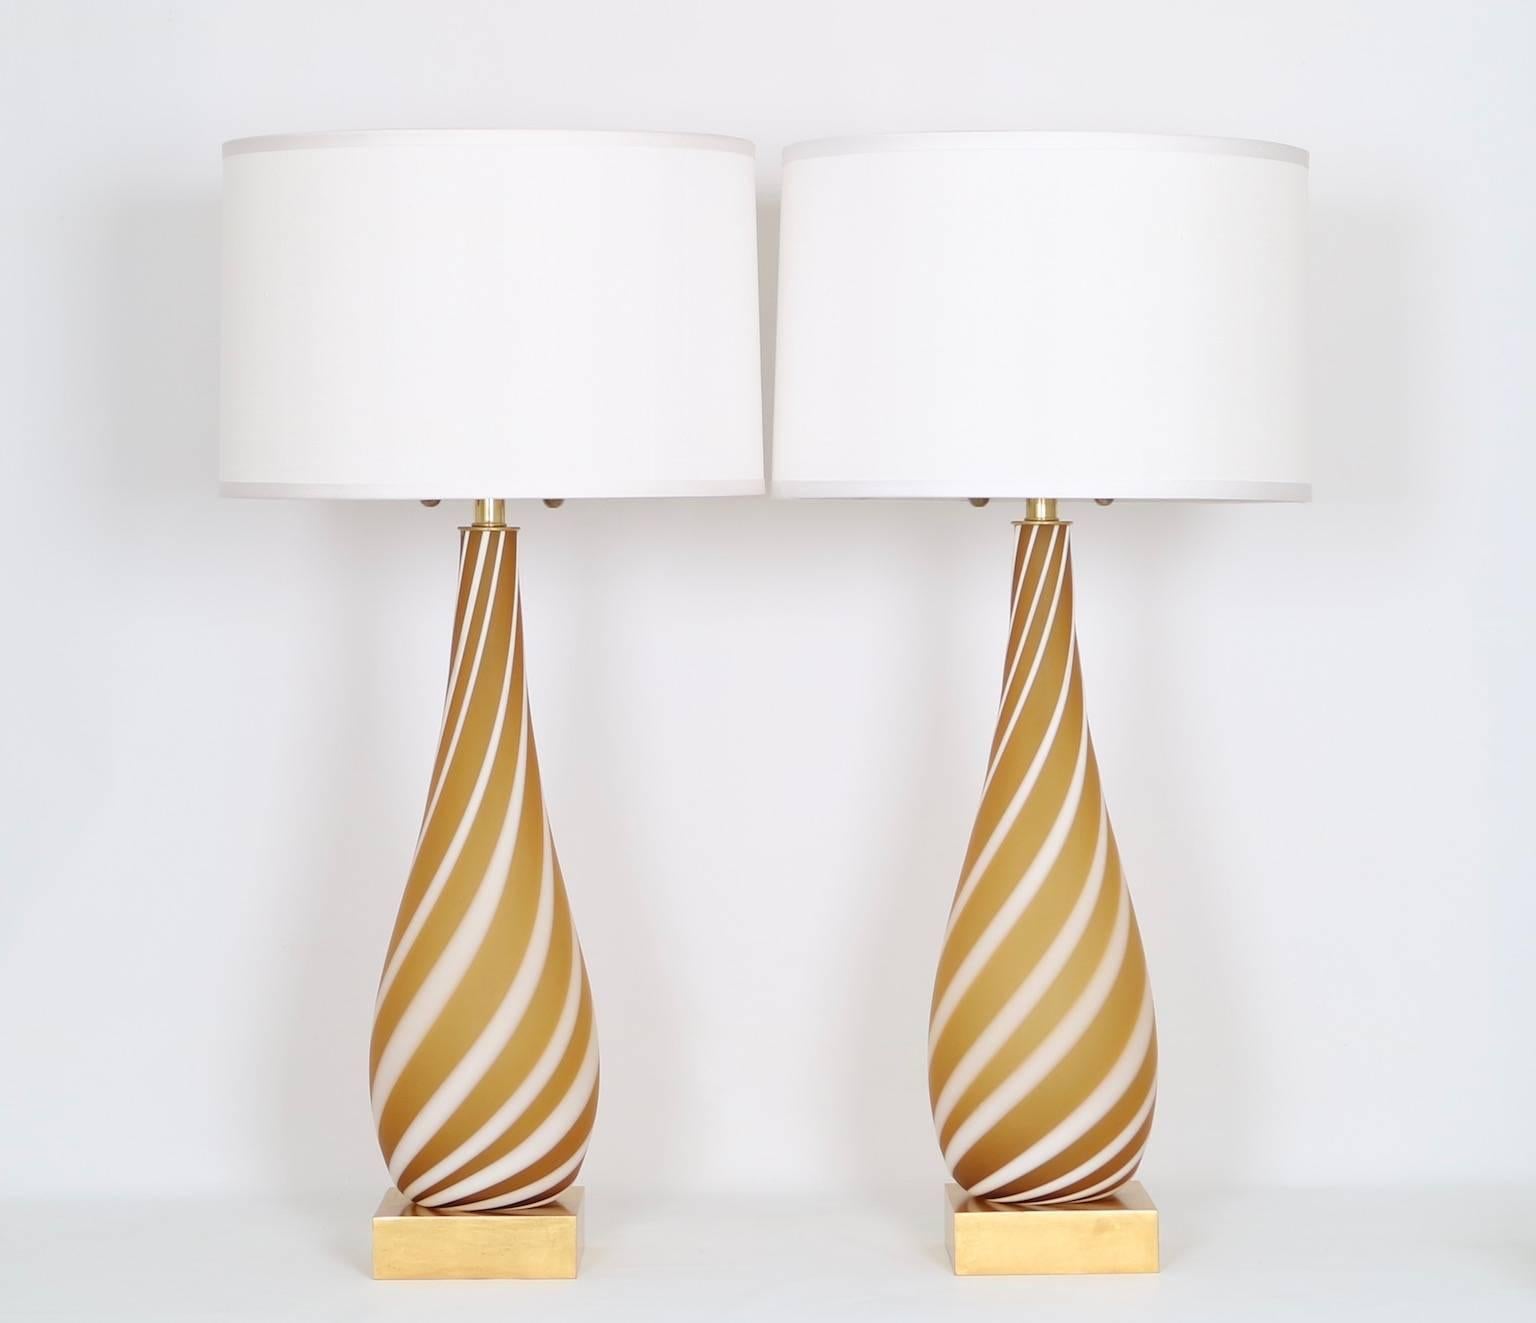 Pair of Mid-Century Modern Murano glass lamps in butterscotch with a white ribbon swirl and mounted on a gilded wooden base. The noted height is to the finial,the height to the top of the glass body is 23.5 in (60 cm). Fully restored with all new